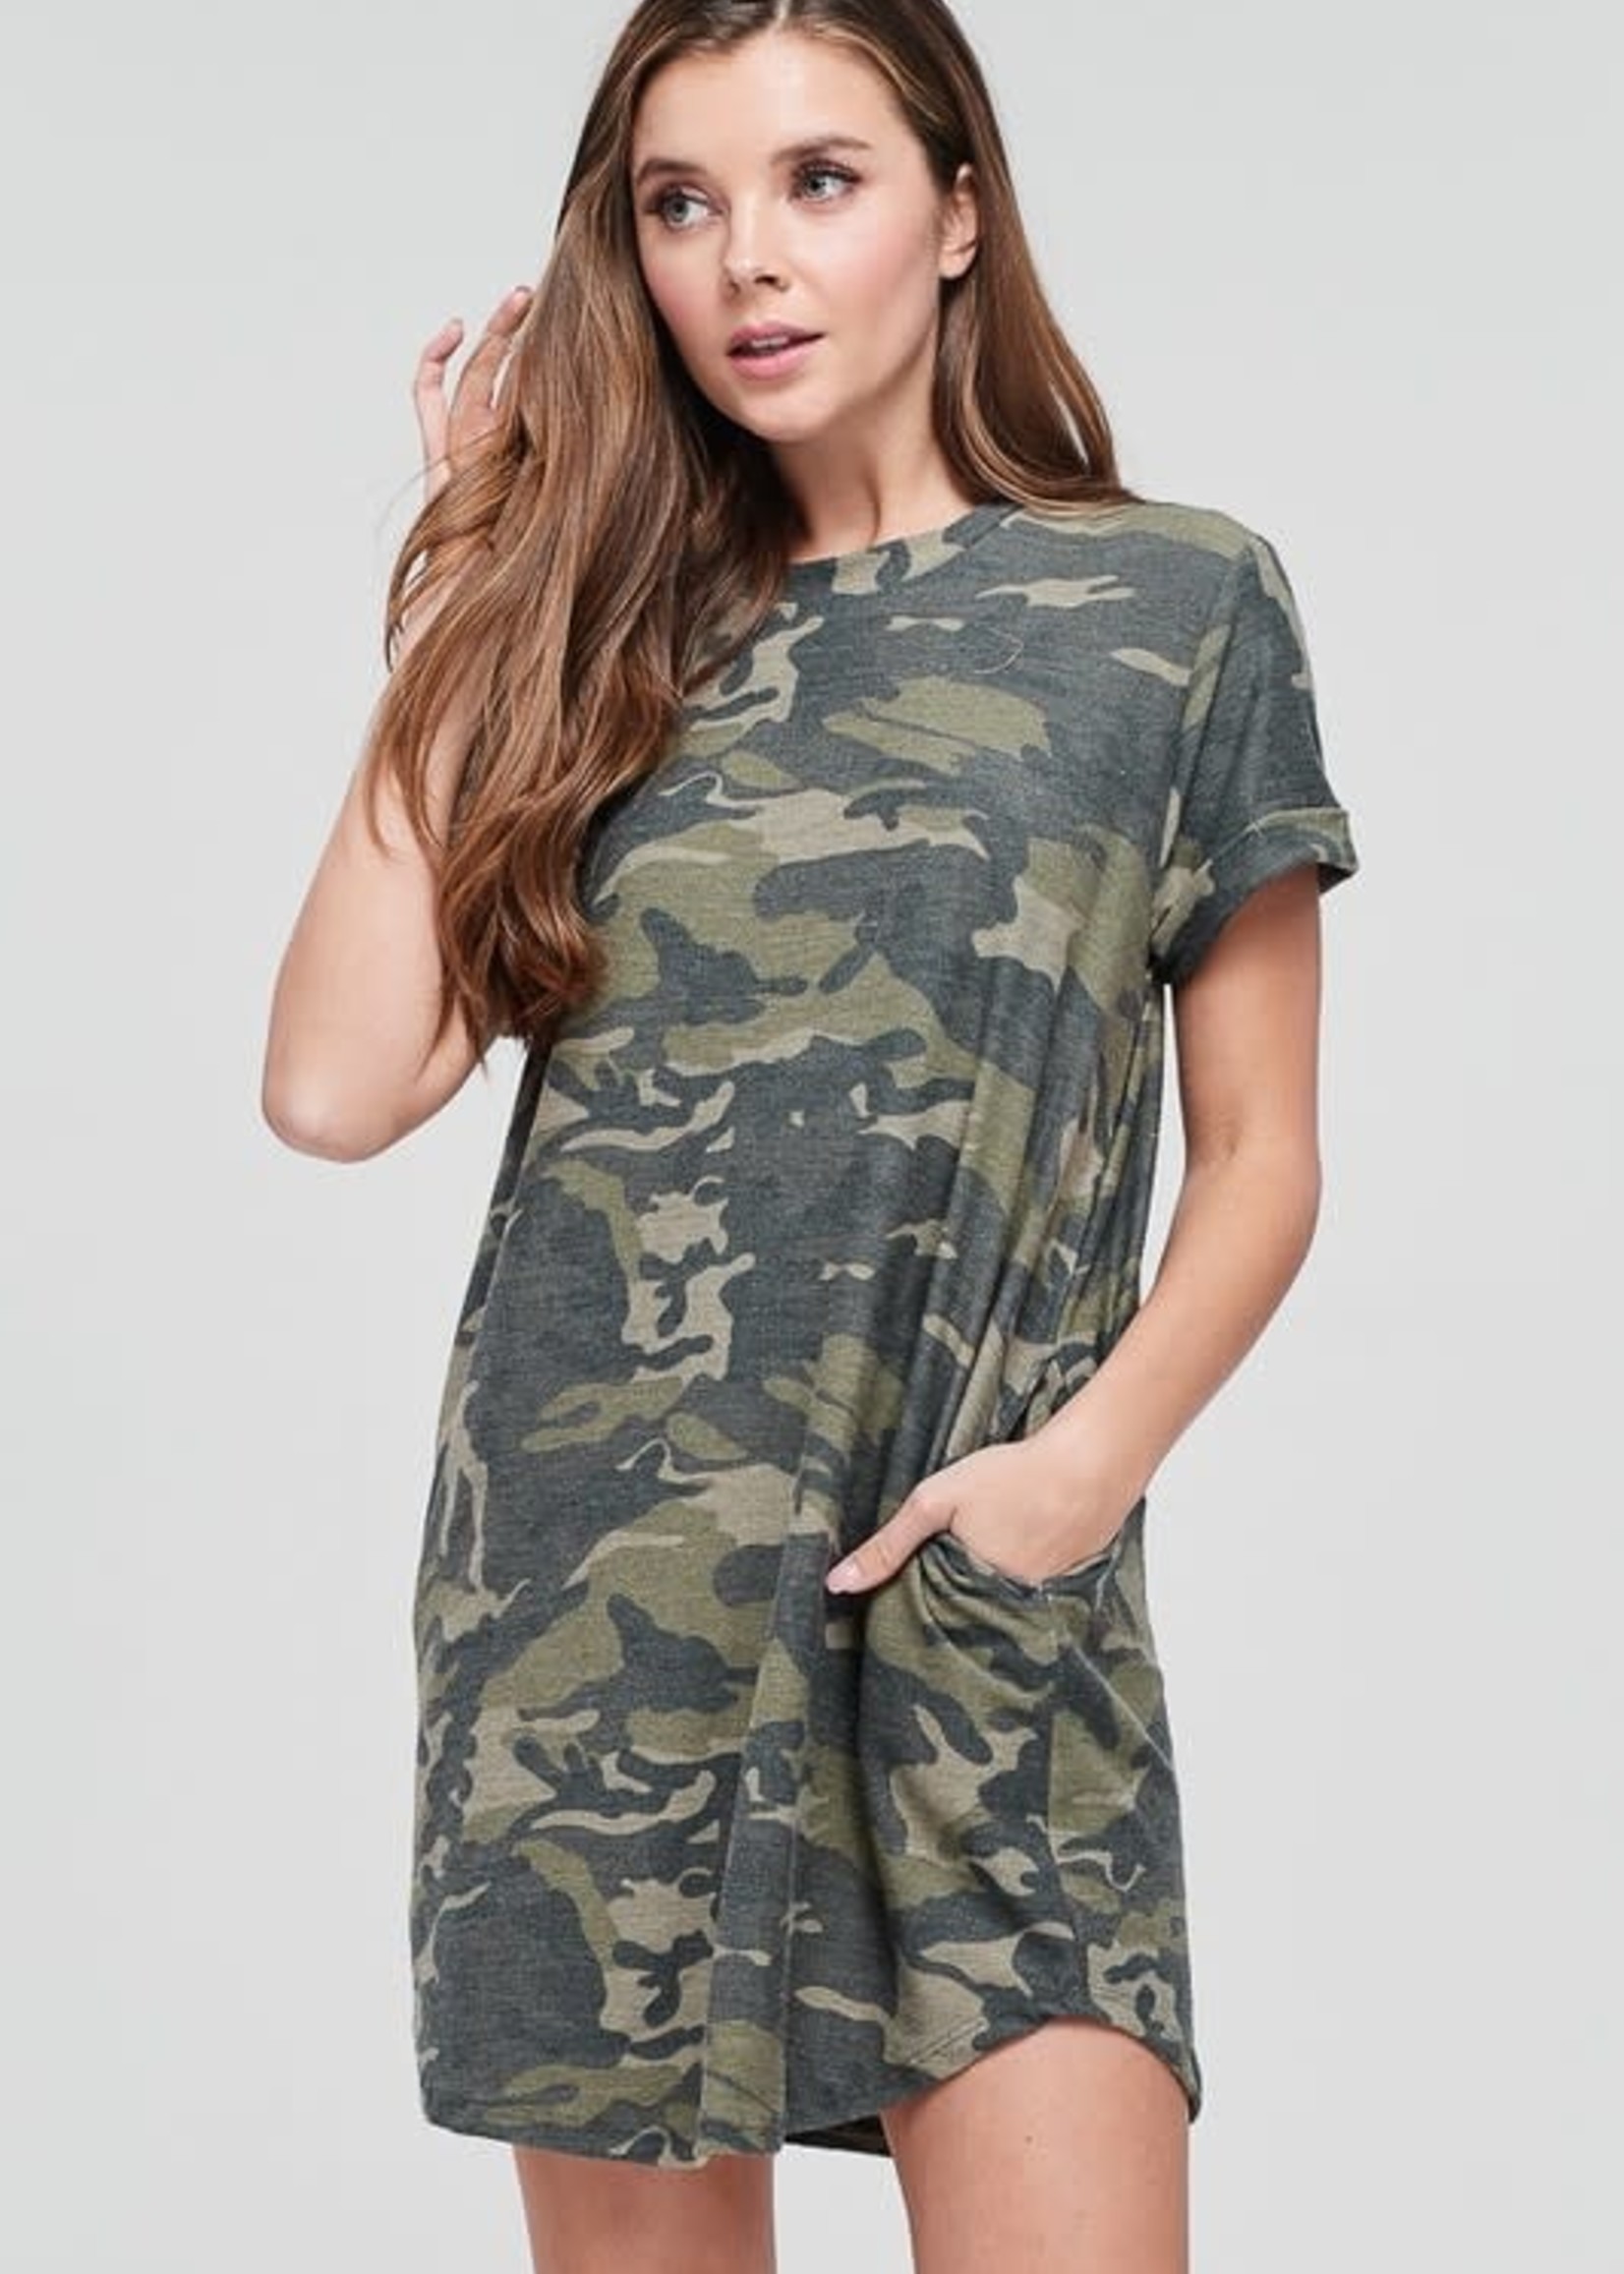 Natty Grace Armed Forces of a Woman T-shirt Dress